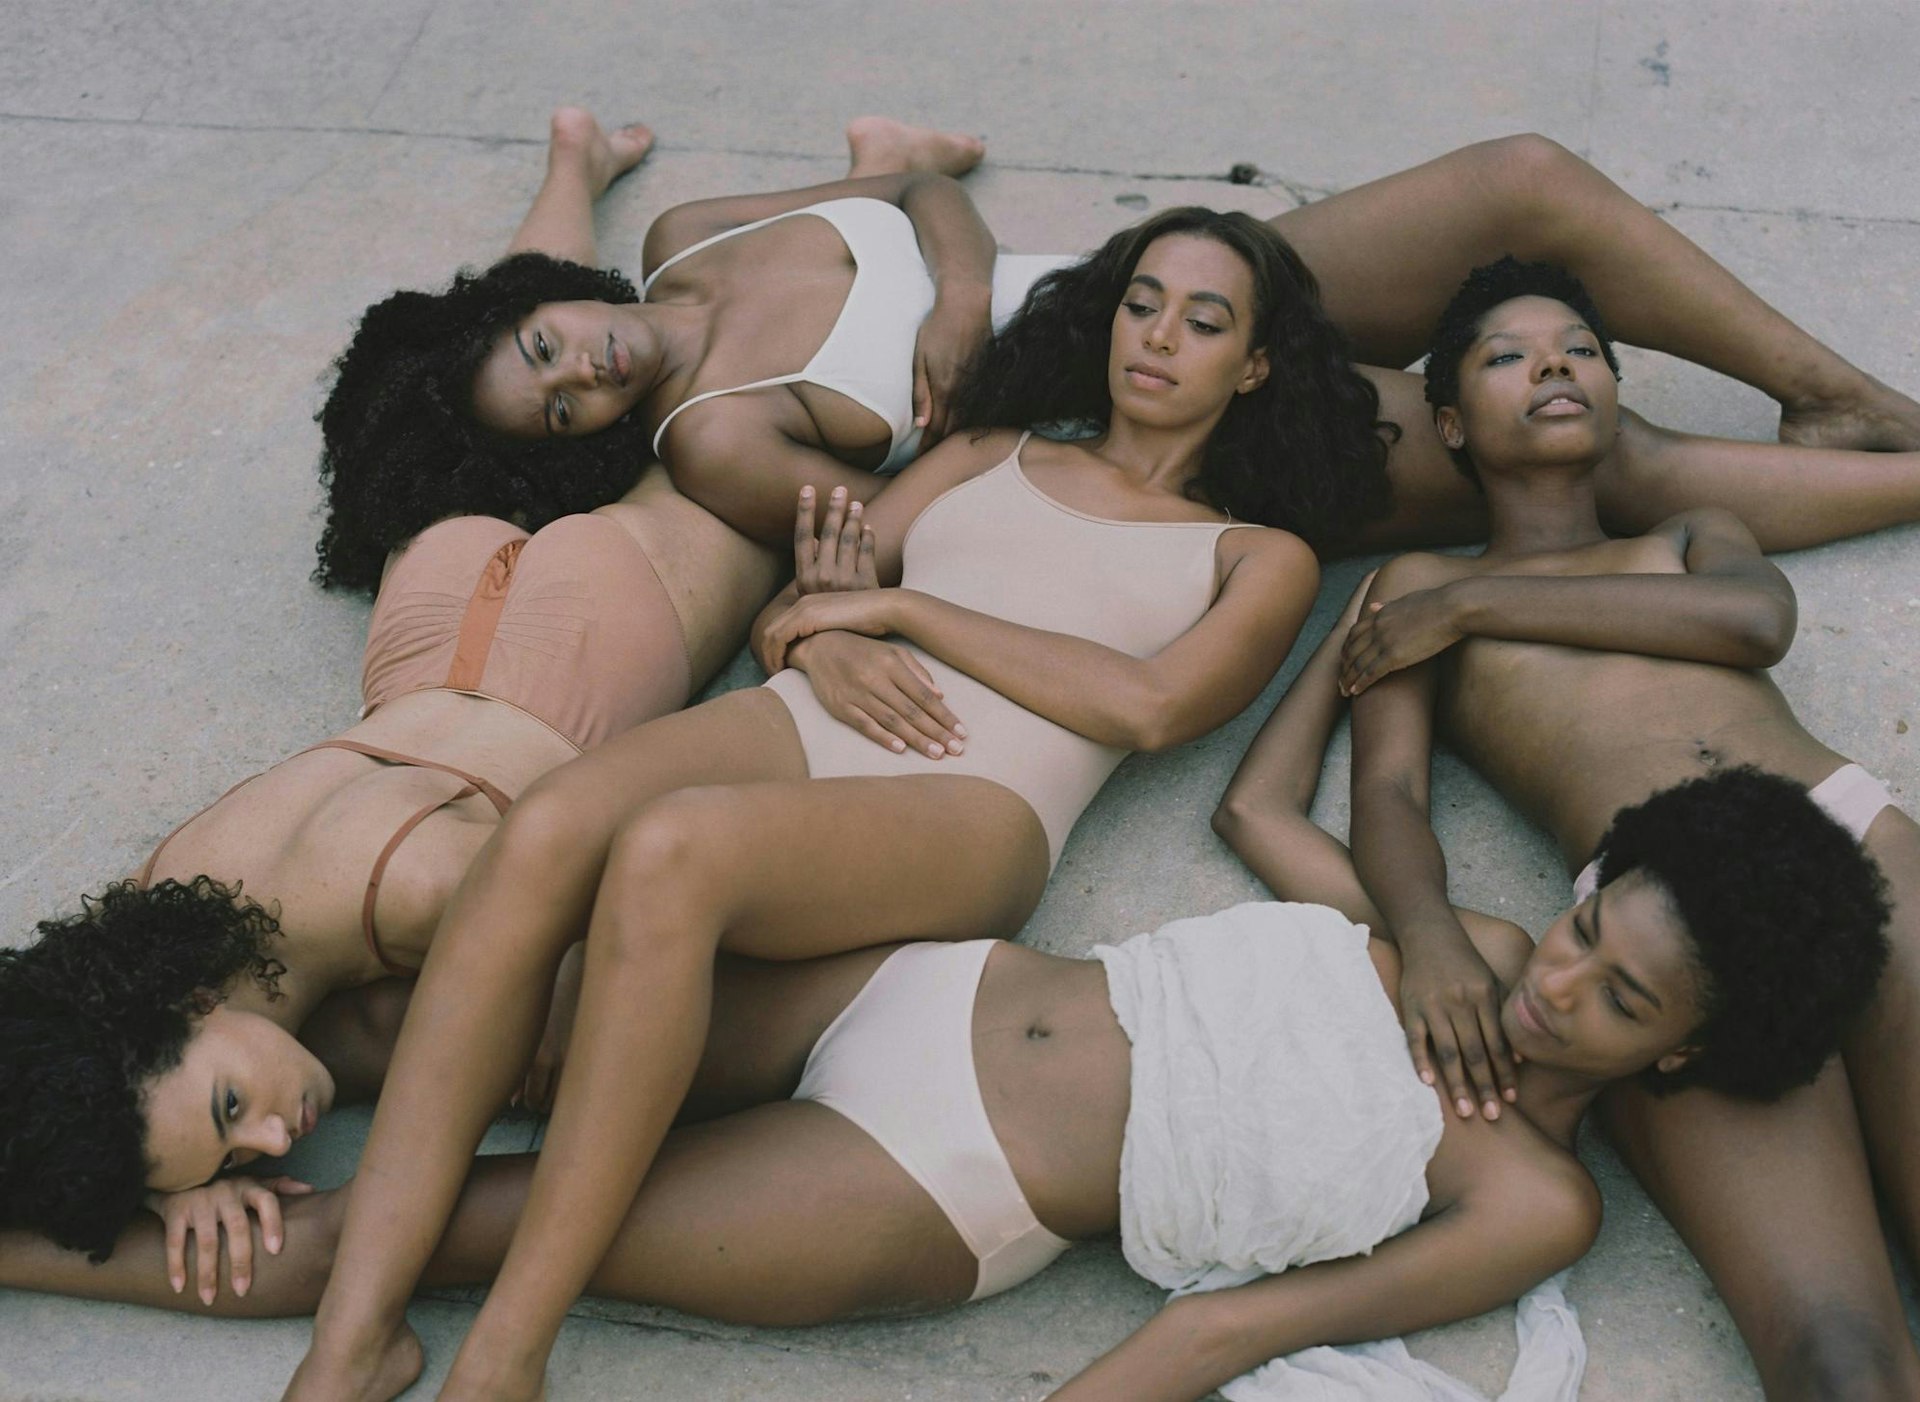 Solange's ode to blackness is exactly what America needs